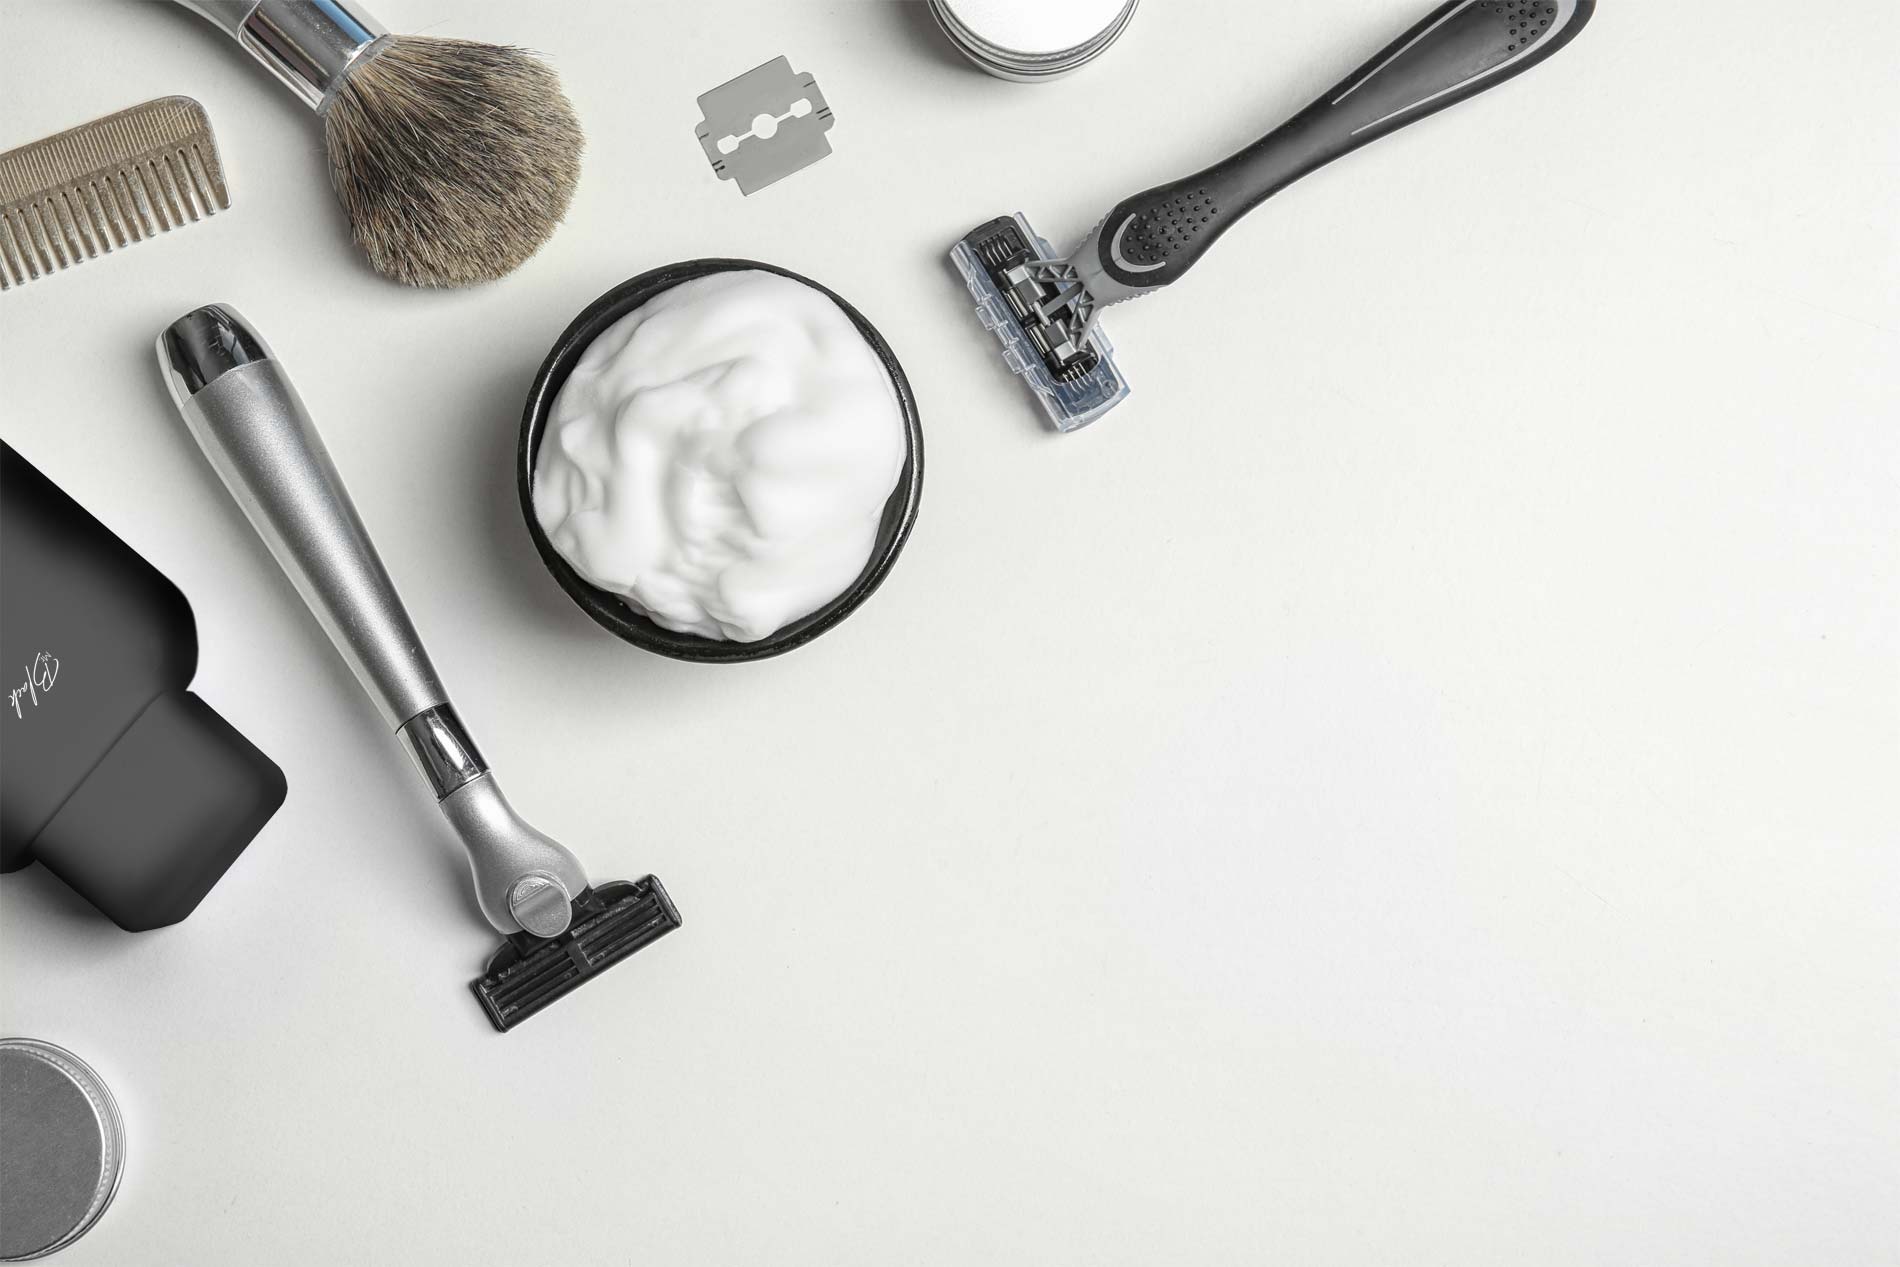 A Collection Of Shaving And Beard Care Products Flatlay Image